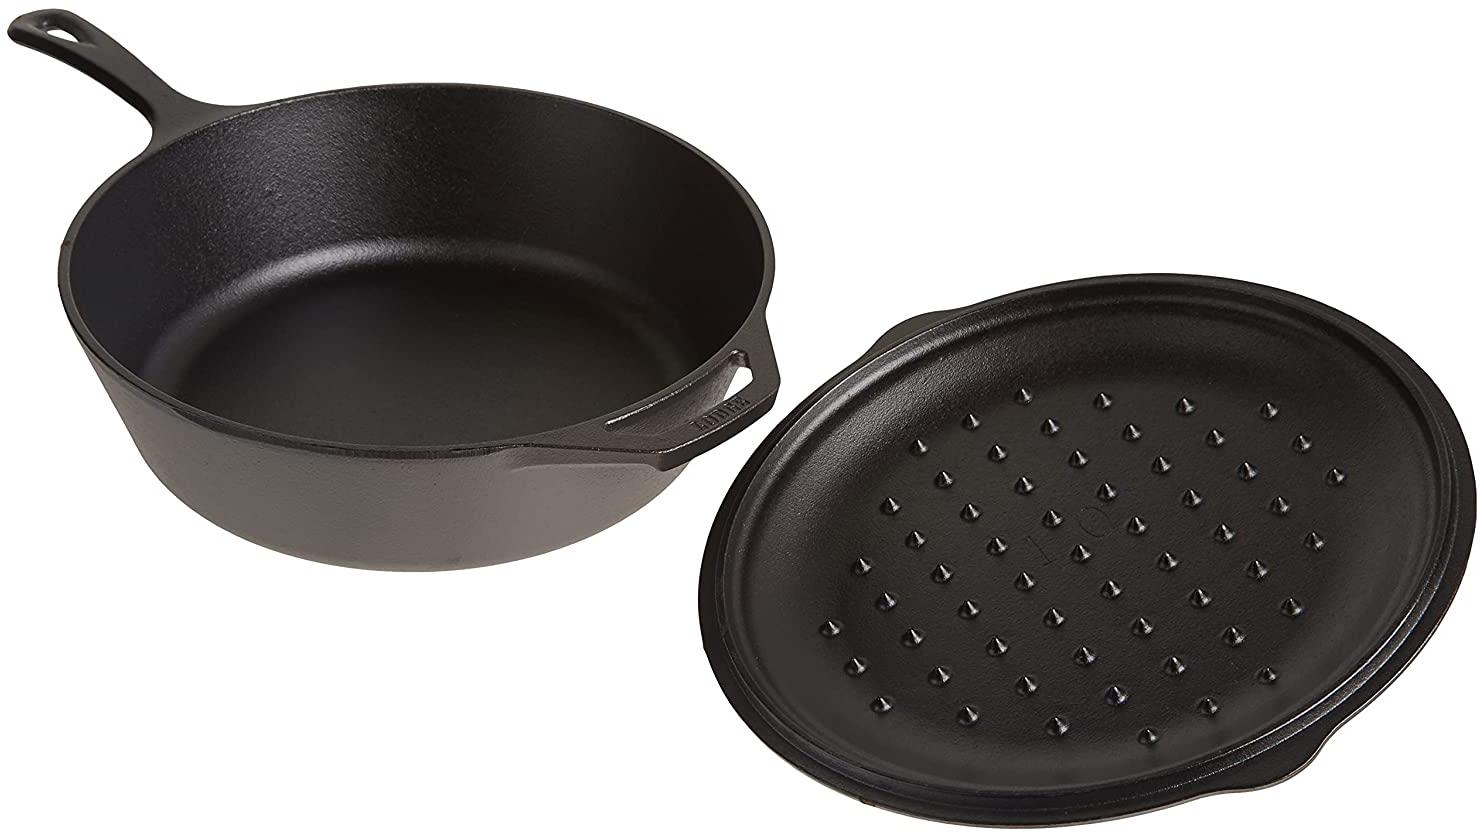 Lodge, Lodge L10CF3 5 Quart Cast Iron Covered Deep Skillet by Lodge, 12 Inches